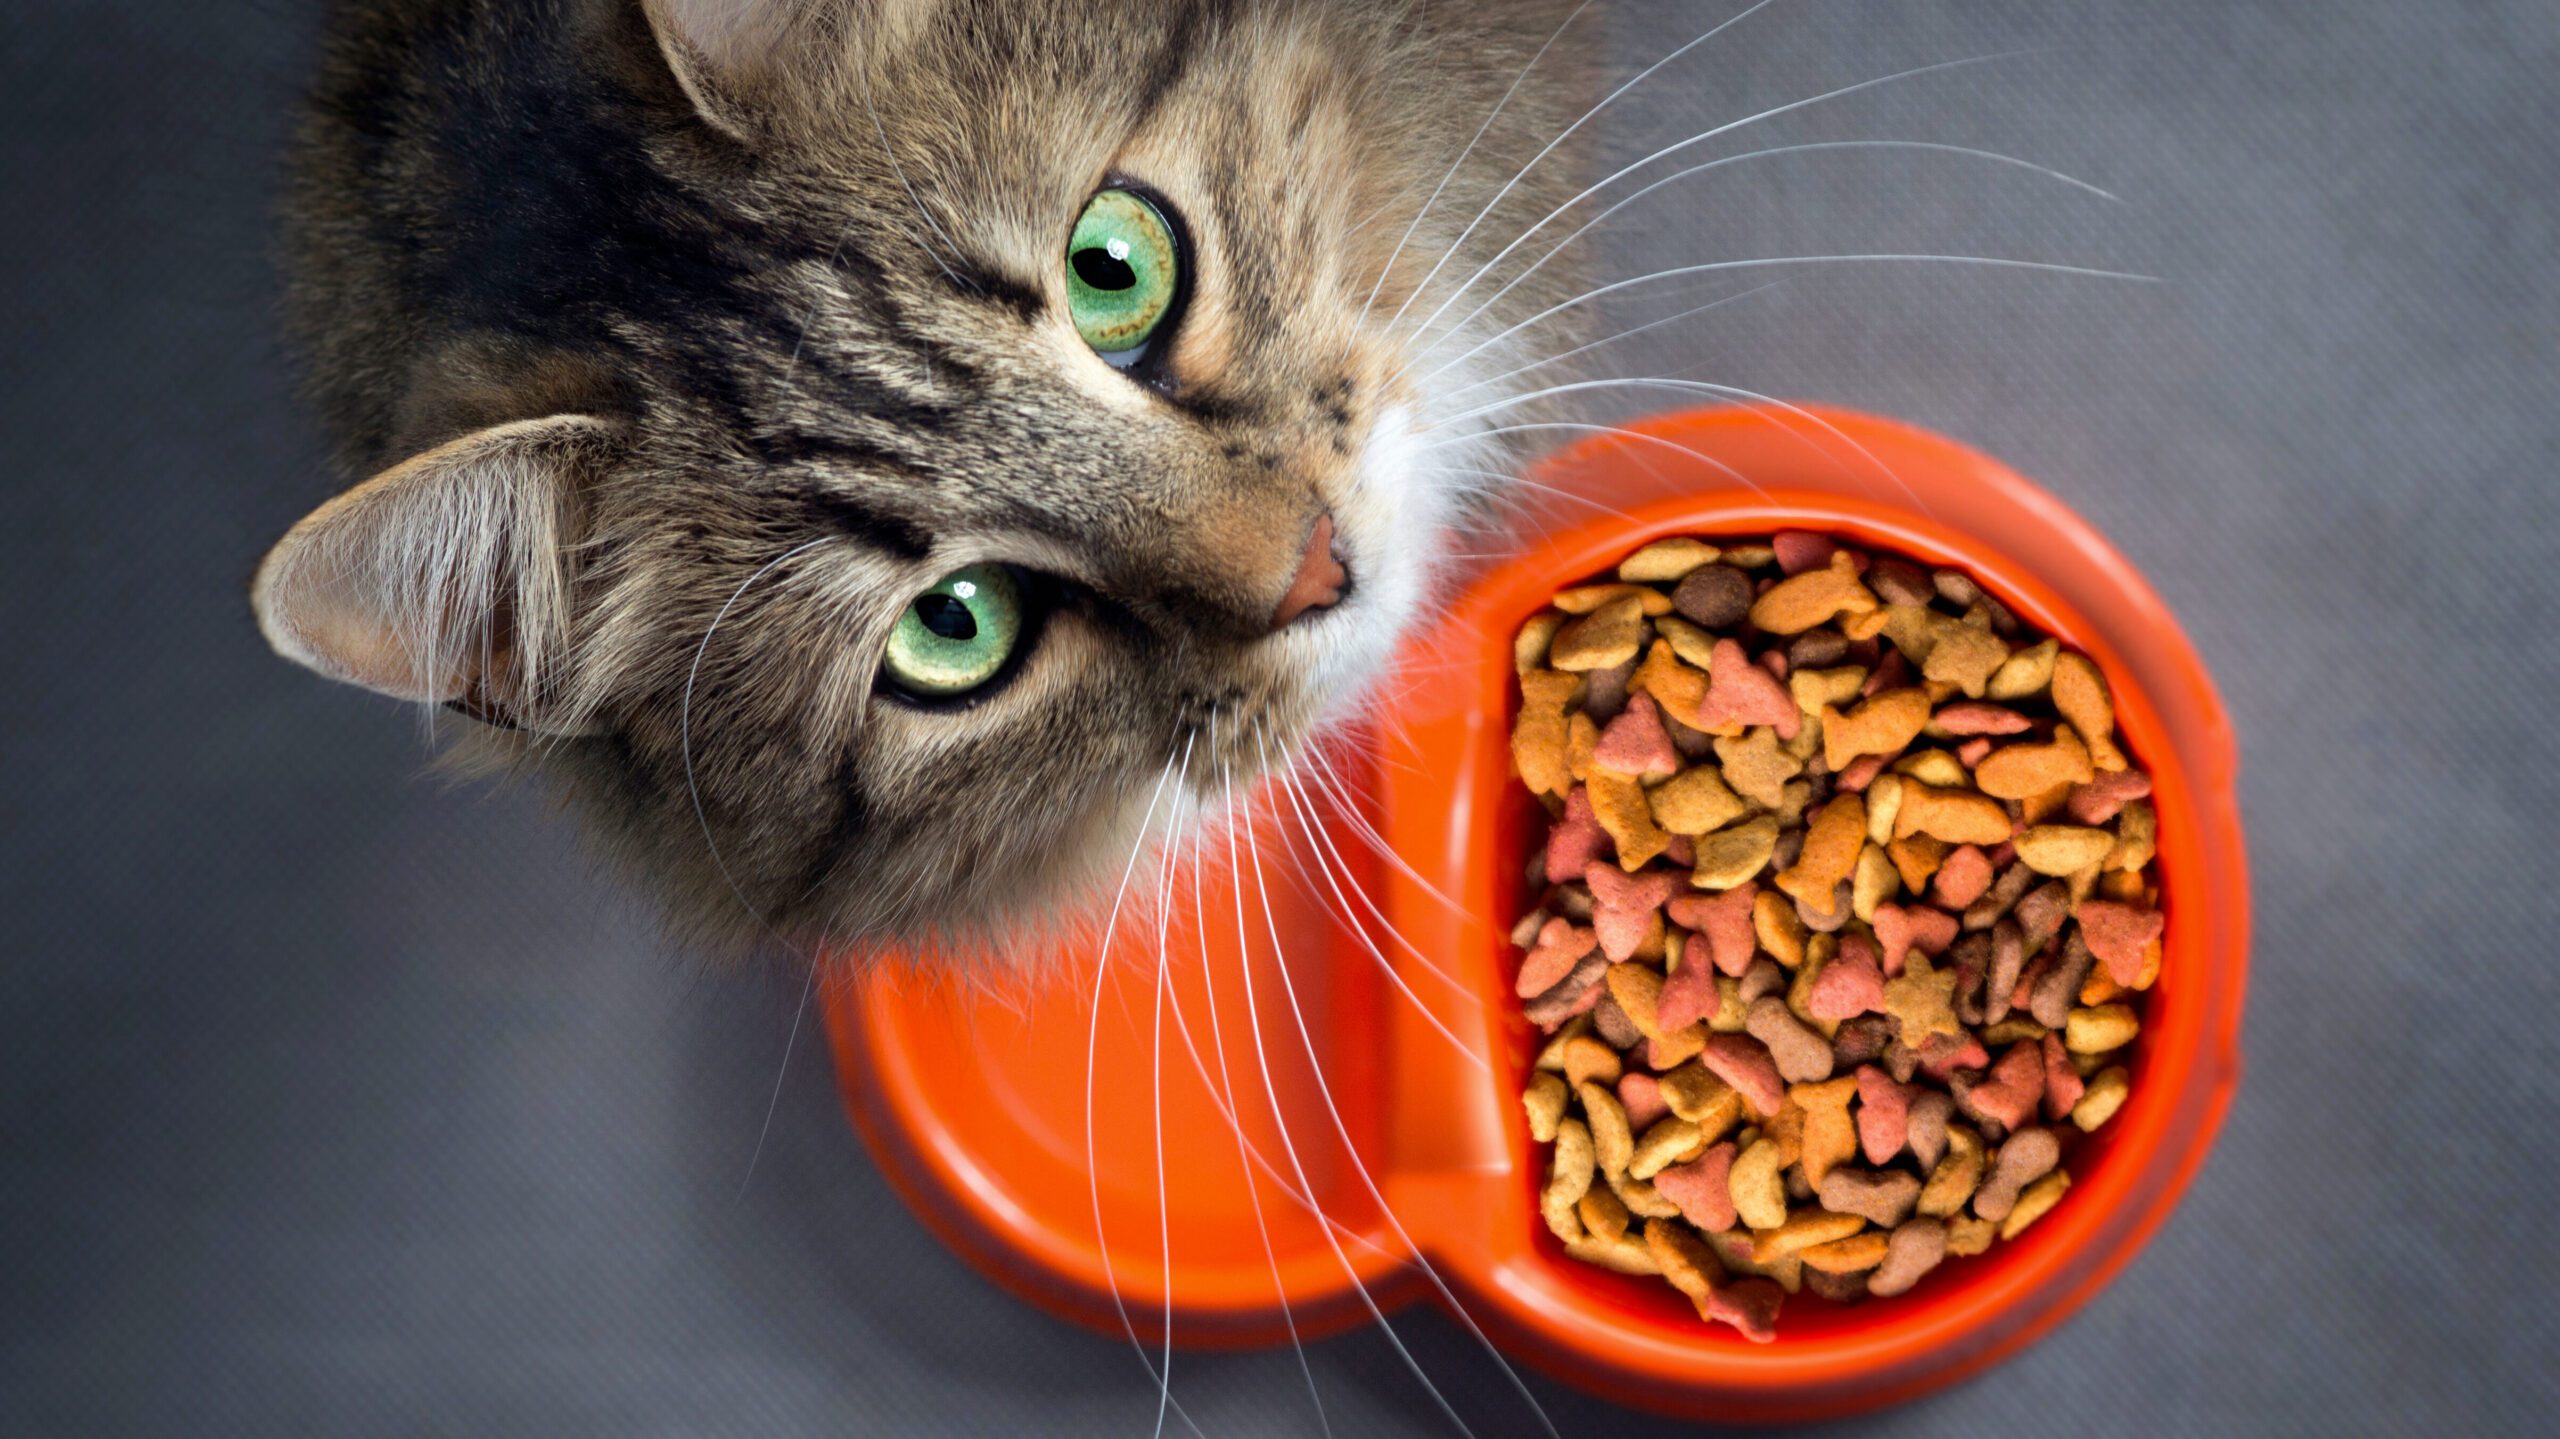 In this blog we explore some of the reasons behind cat vomiting, common causes, and when it might be time to consult a vet.